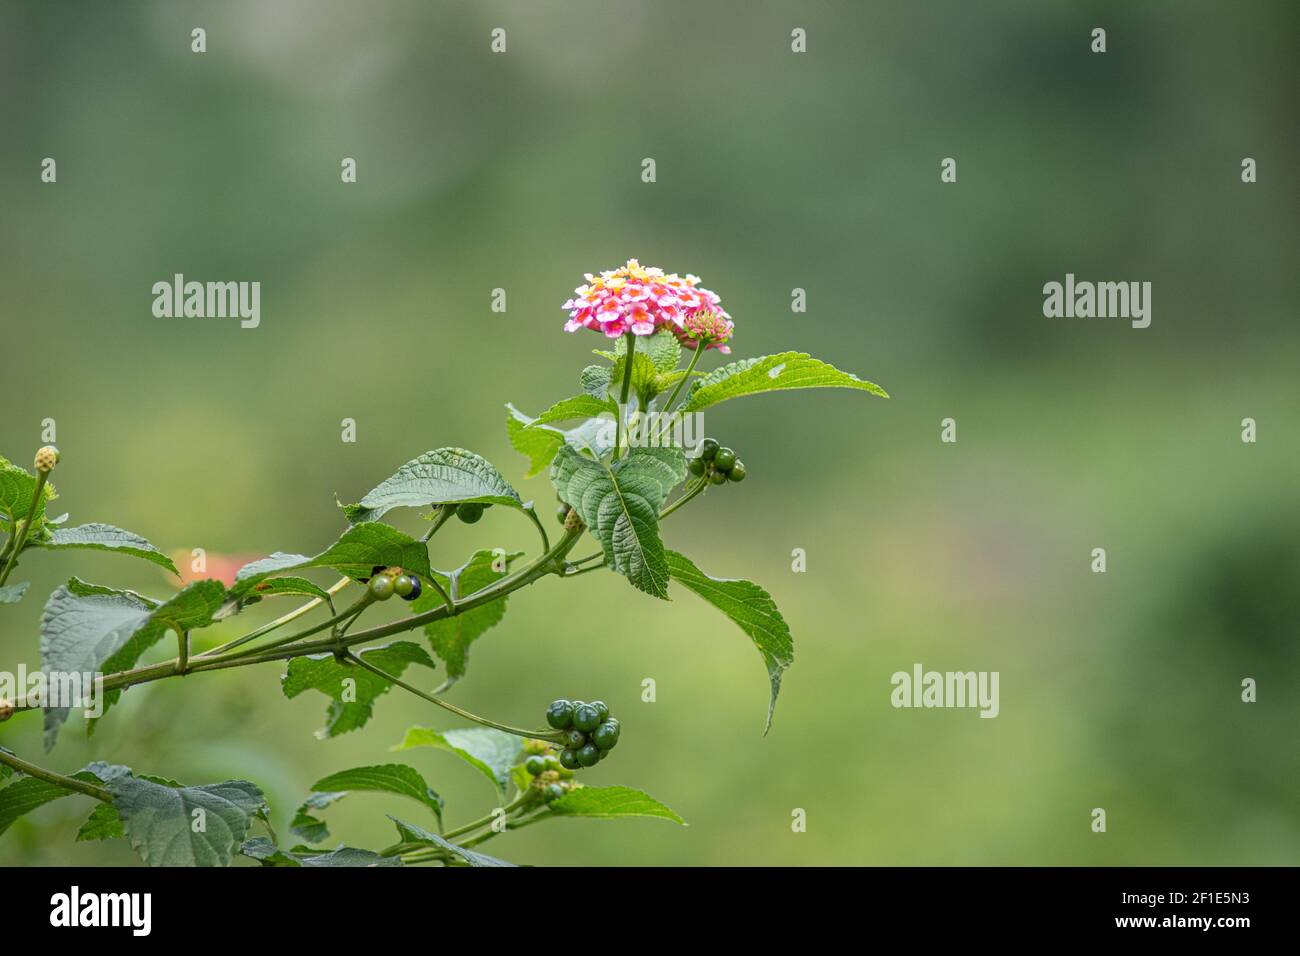 Flower of perennial bushy plant that blooms throughout the year Stock Photo